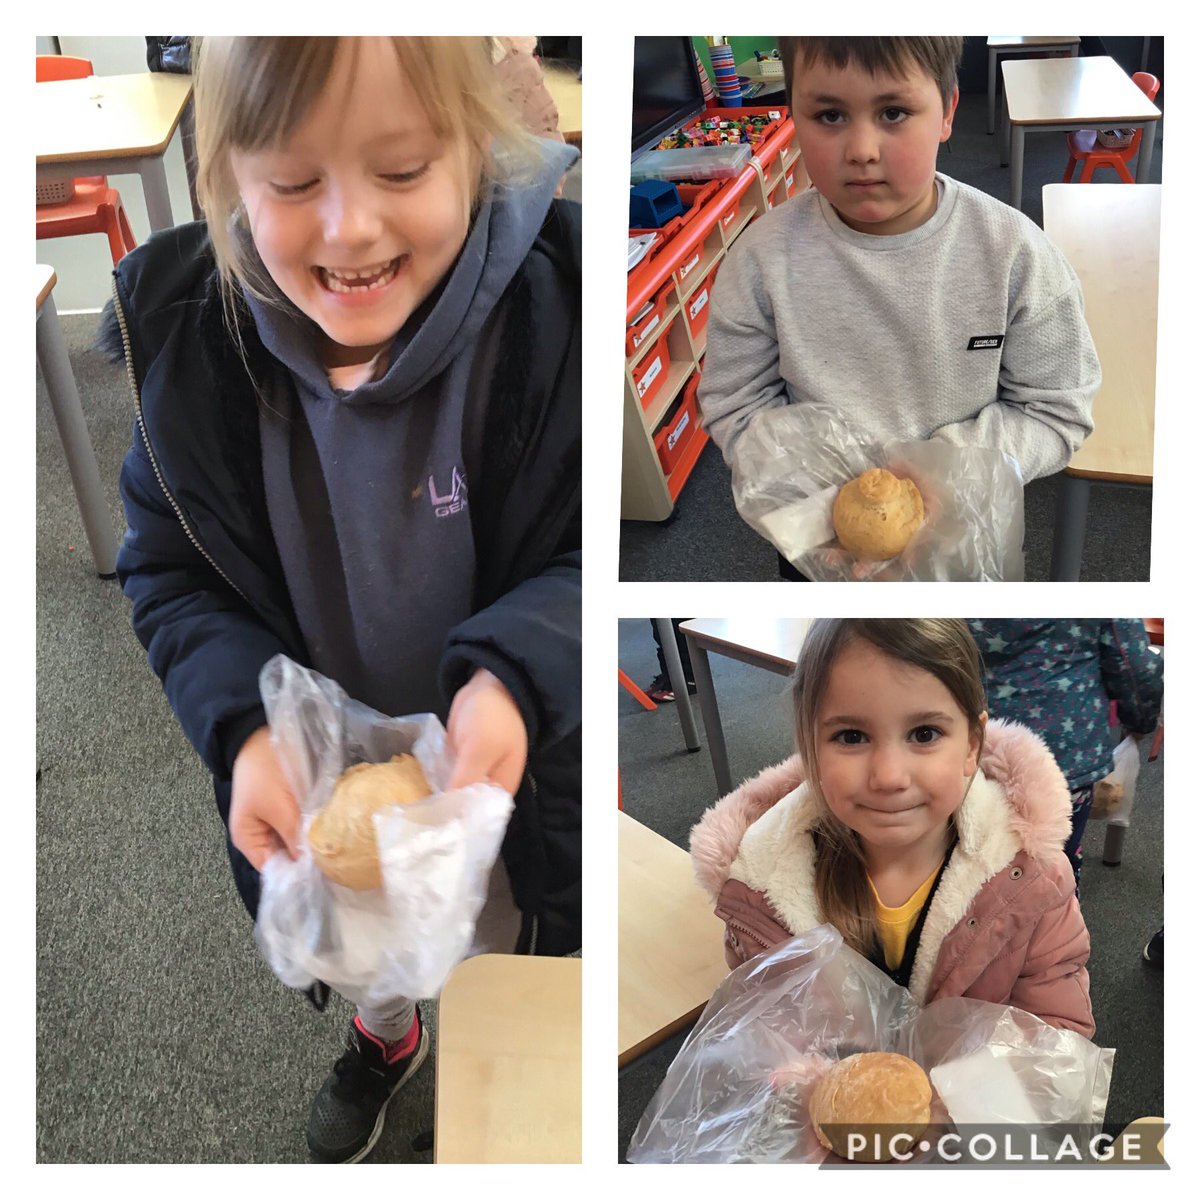 Dinosaur bread has baked beautifully. The Hastings building smelt amazing. @superal2012 @Astley_Primary #weareace #familybaking #welovecooking #bread